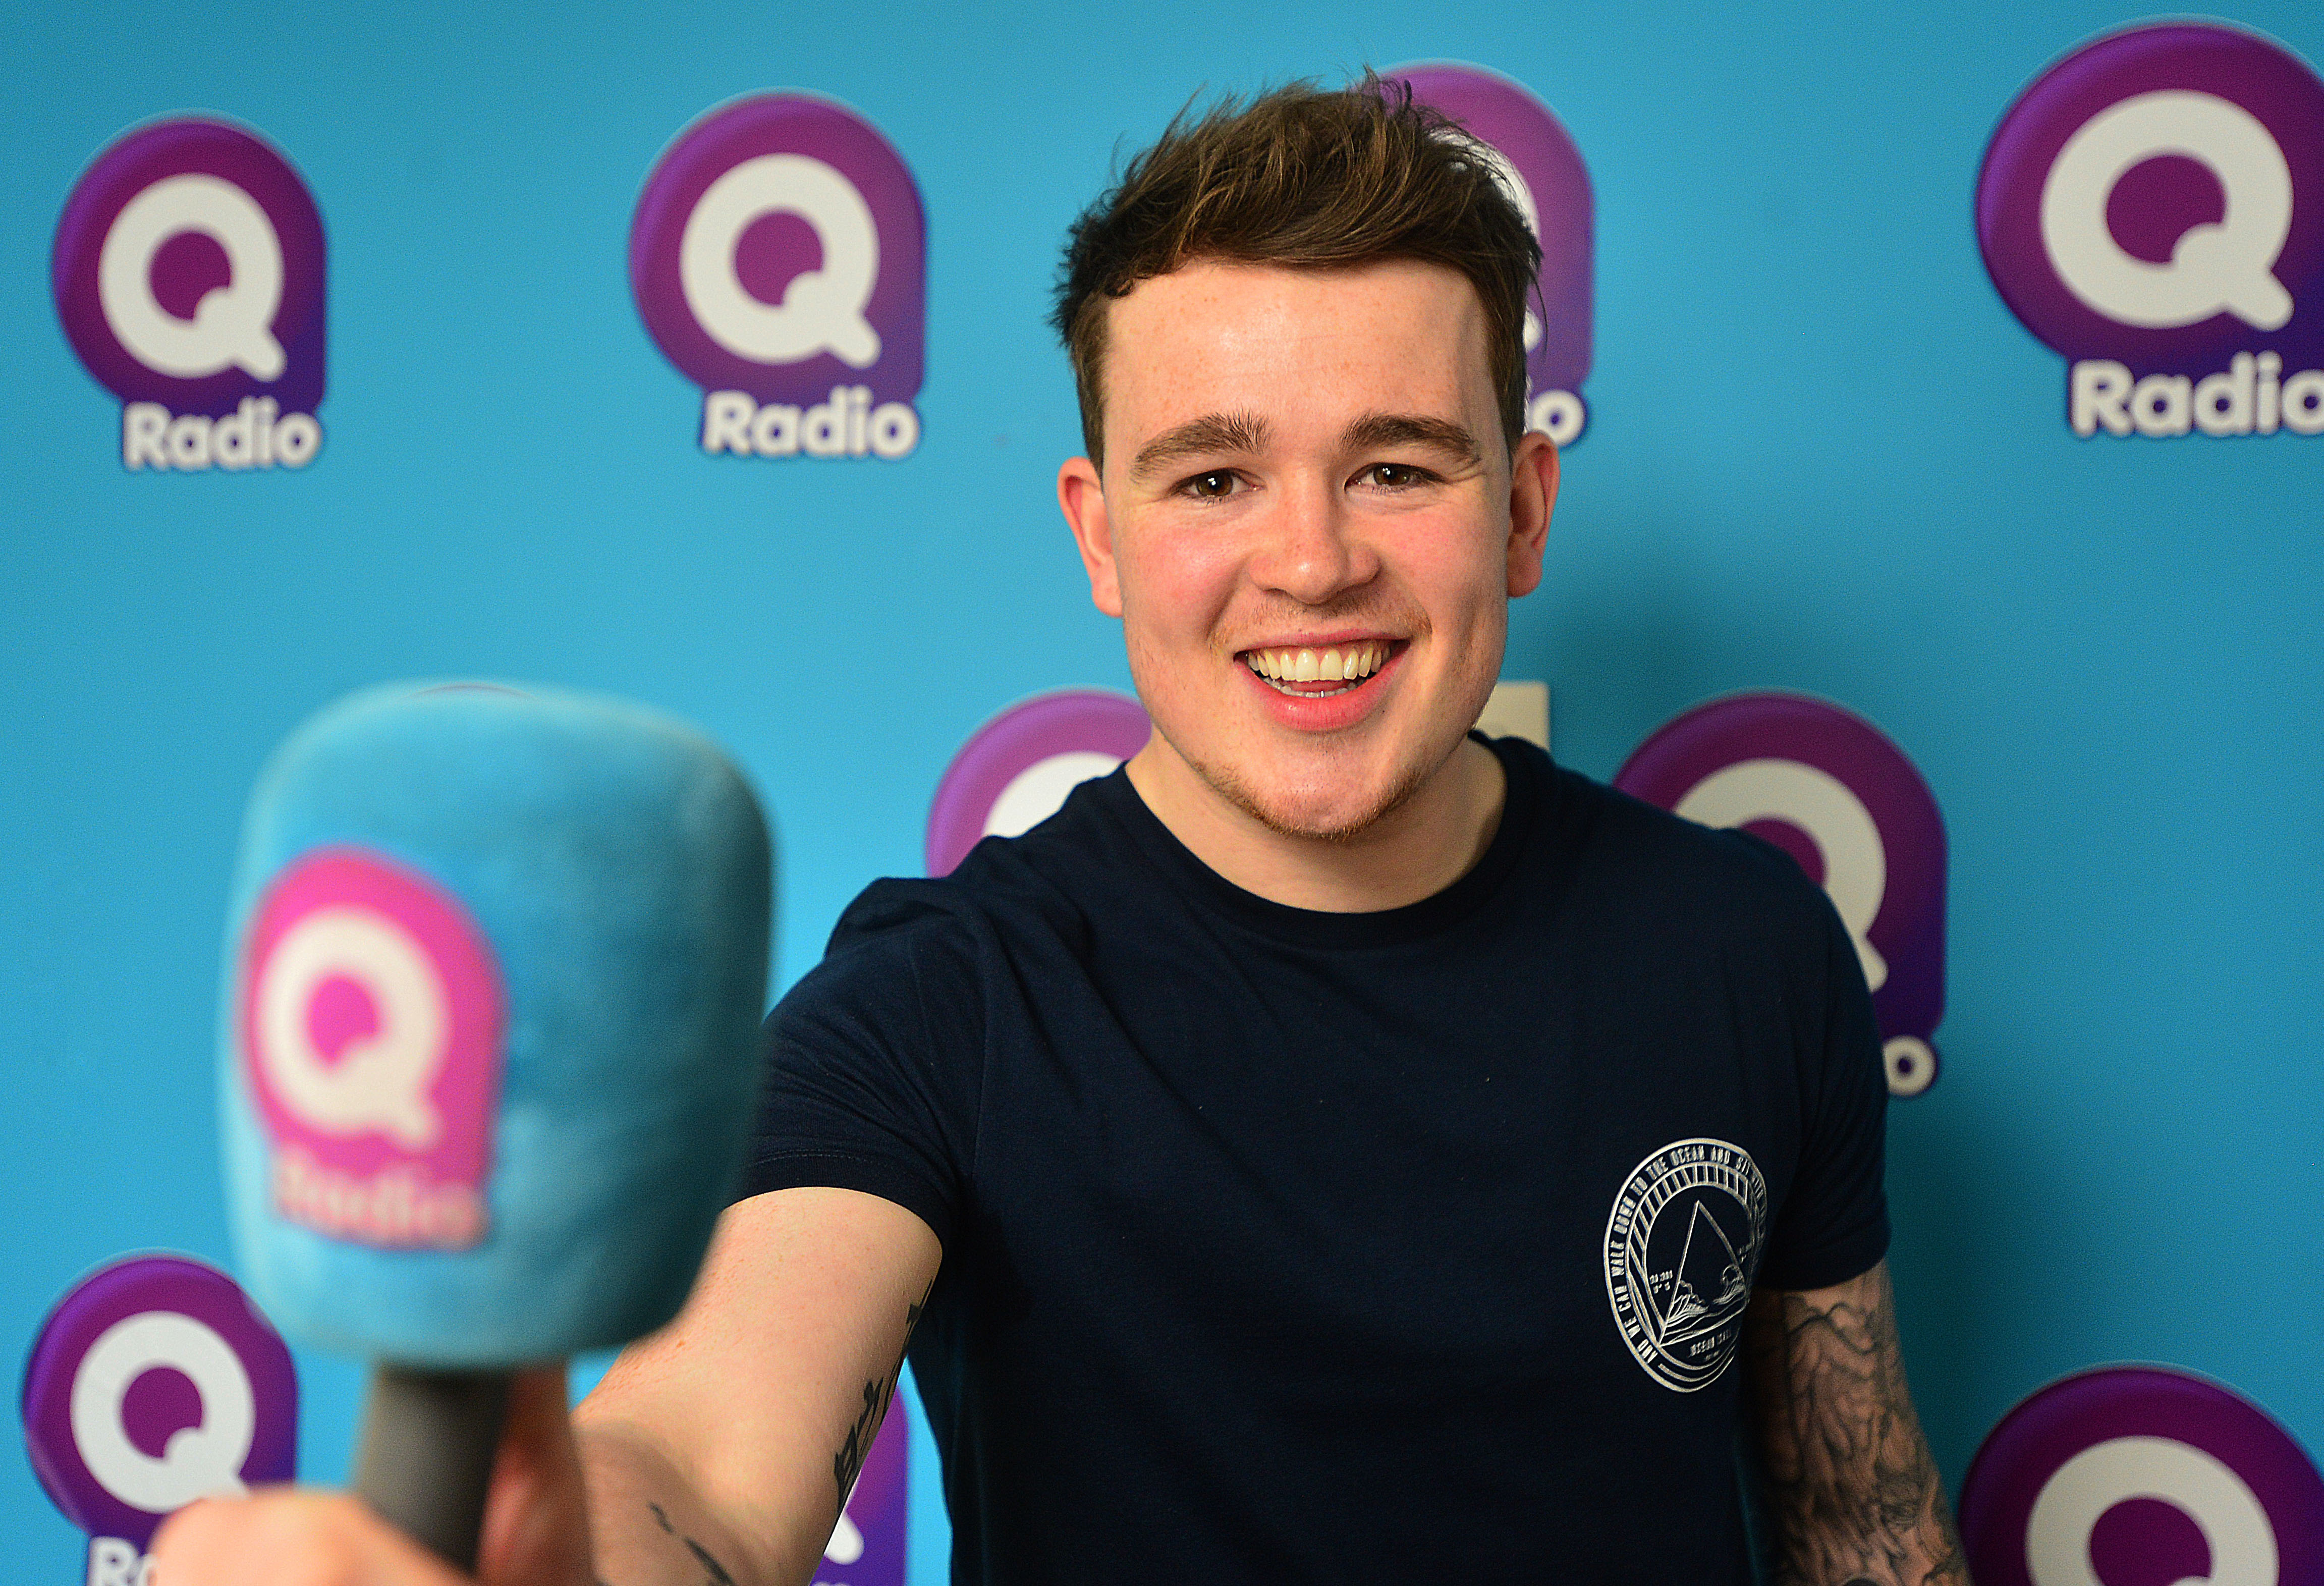 X Factor’s Eoghan Quigg returns to the spotlight with new radio gig